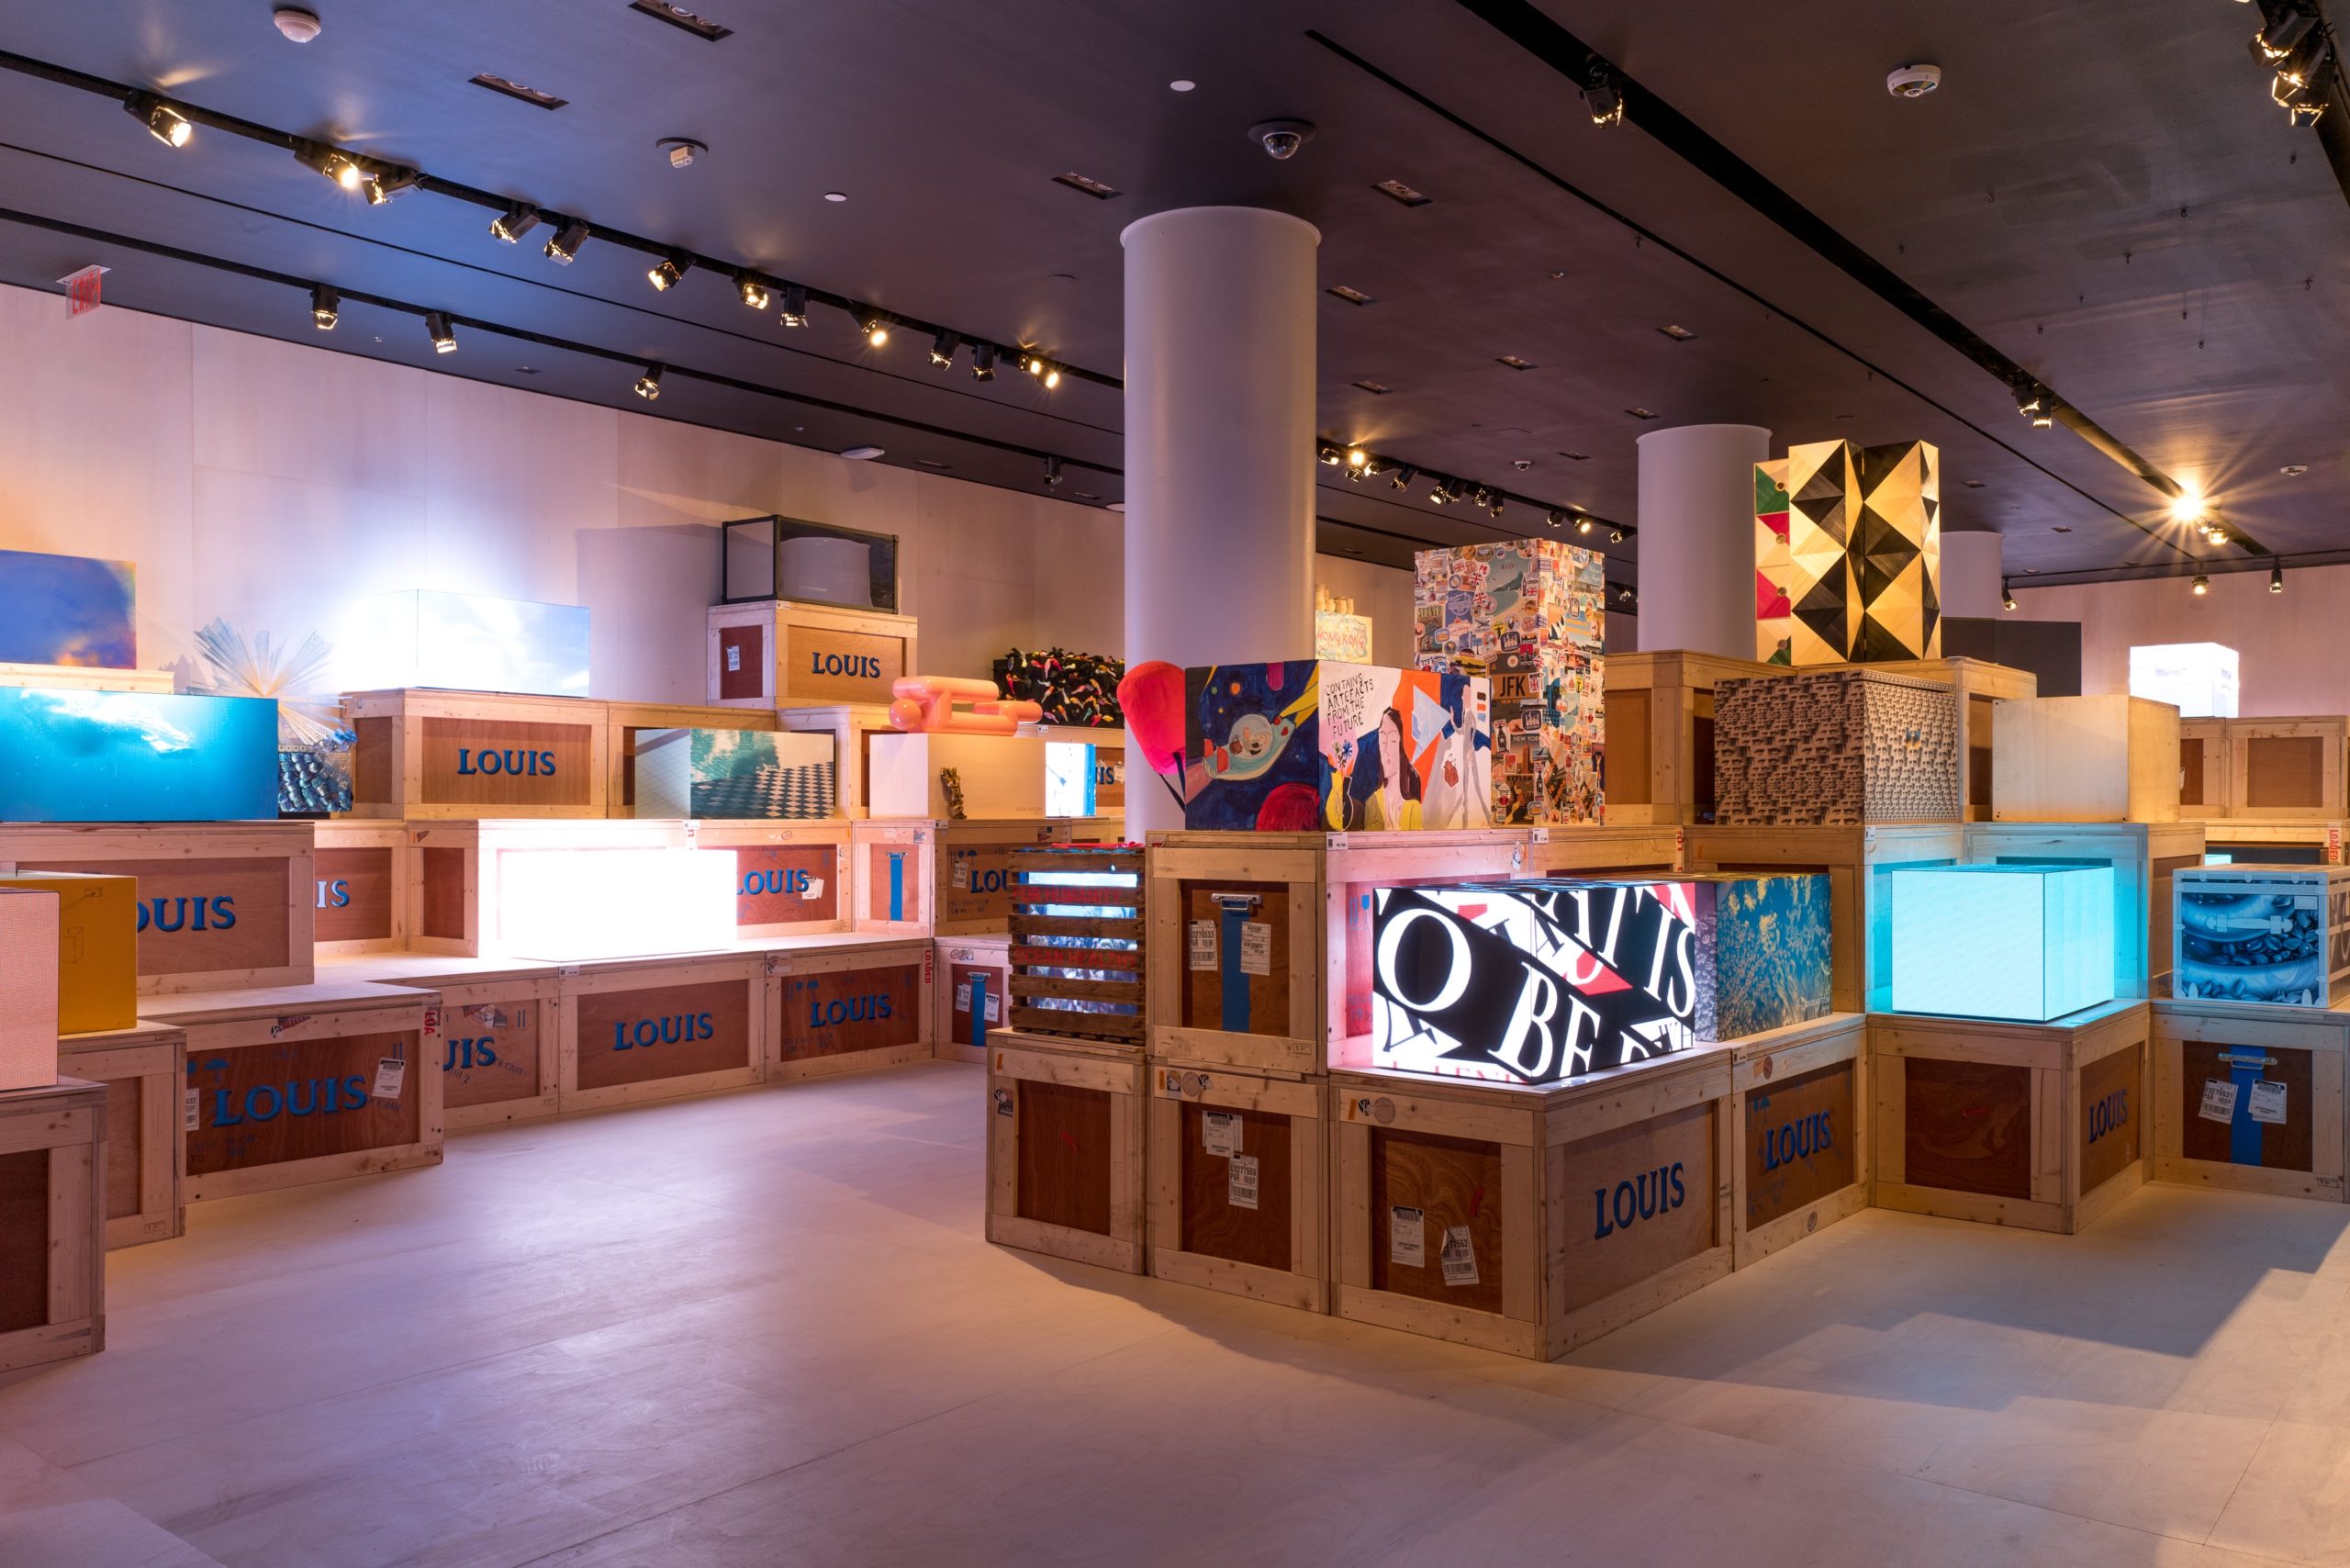 "200 Trunks, 200 Visionaries: The Exhibition" in New York